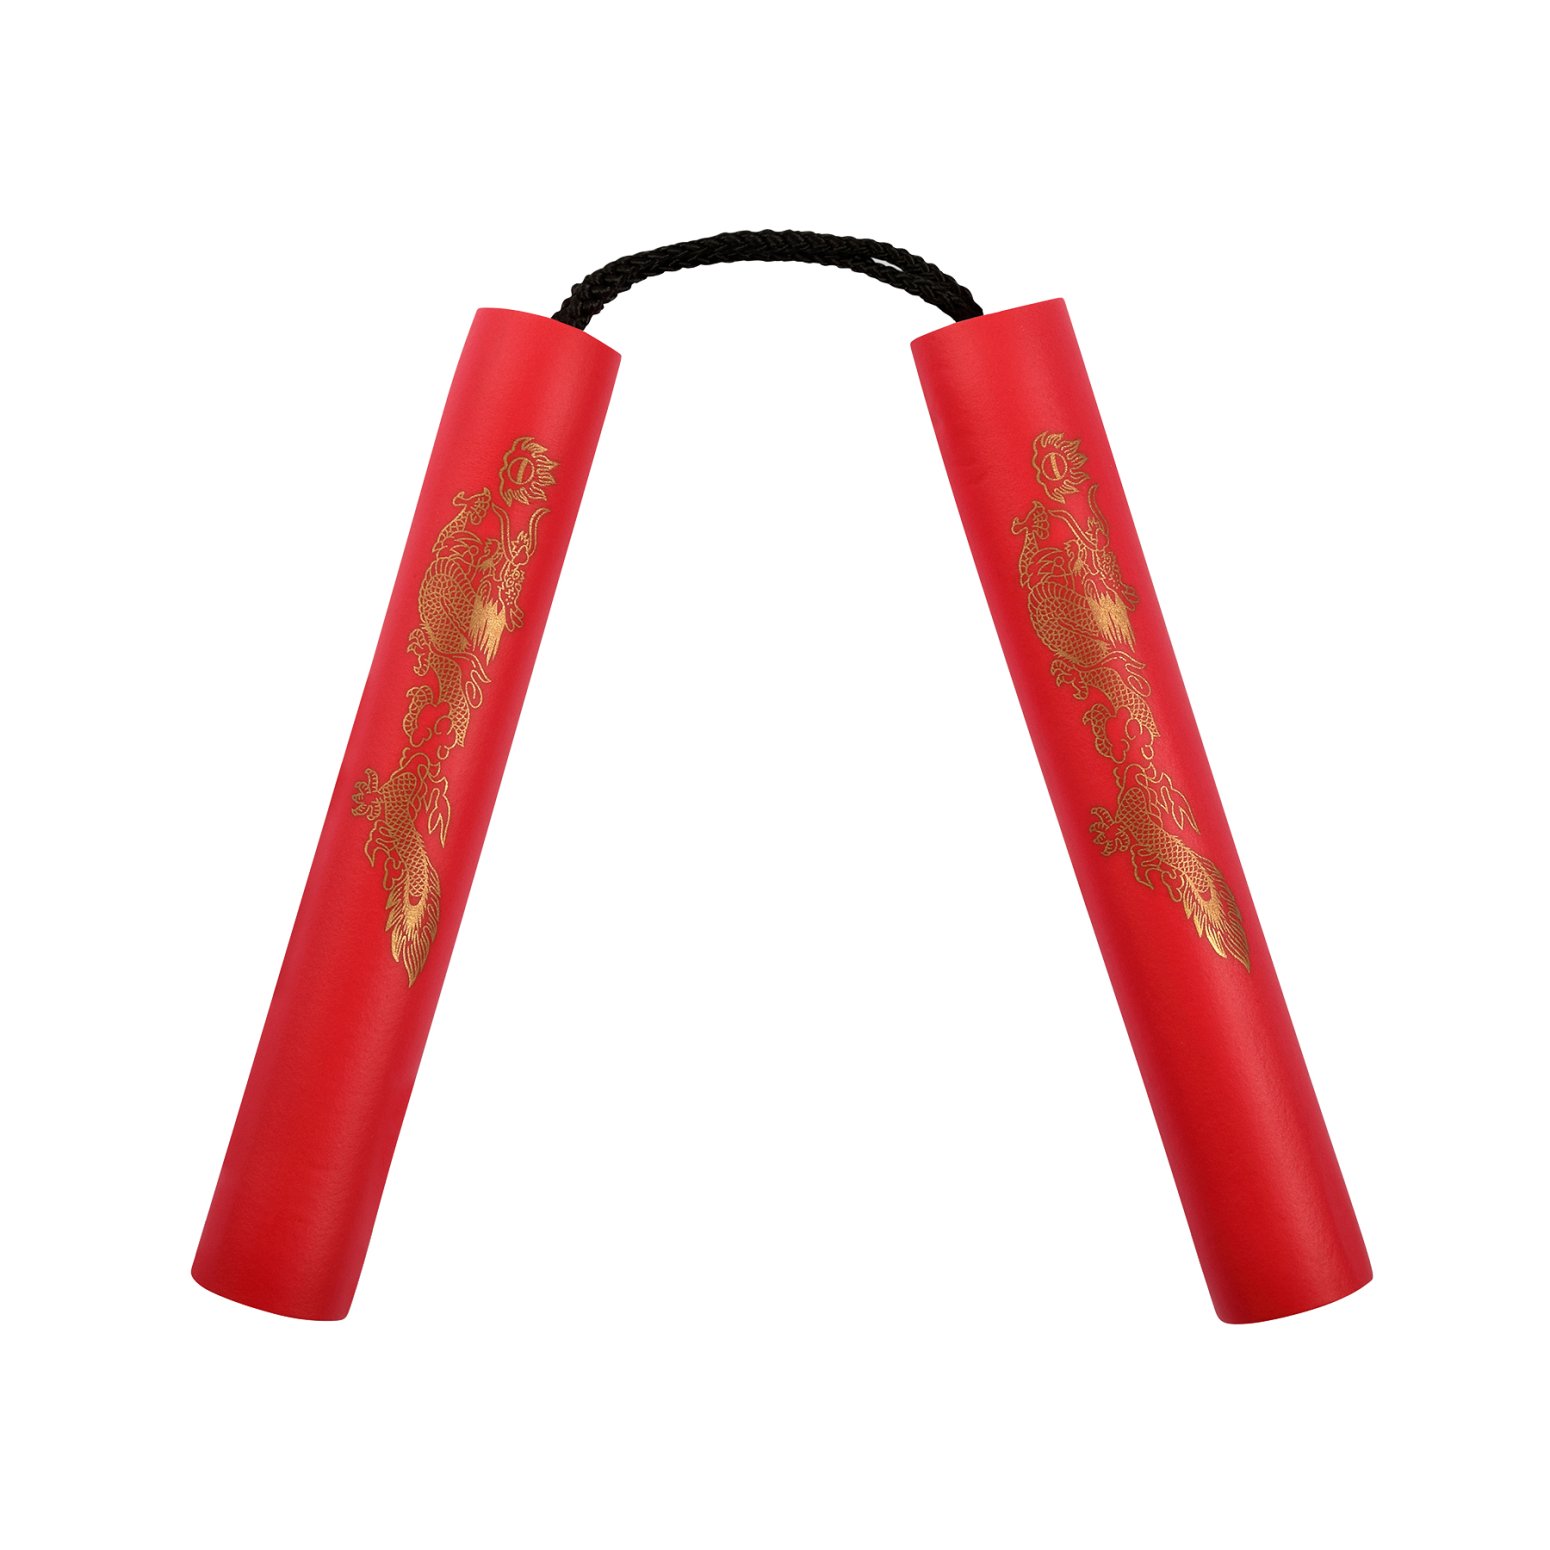 NR-001: 8 Inches Red Nunchaku Foam with Cord - Click Image to Close